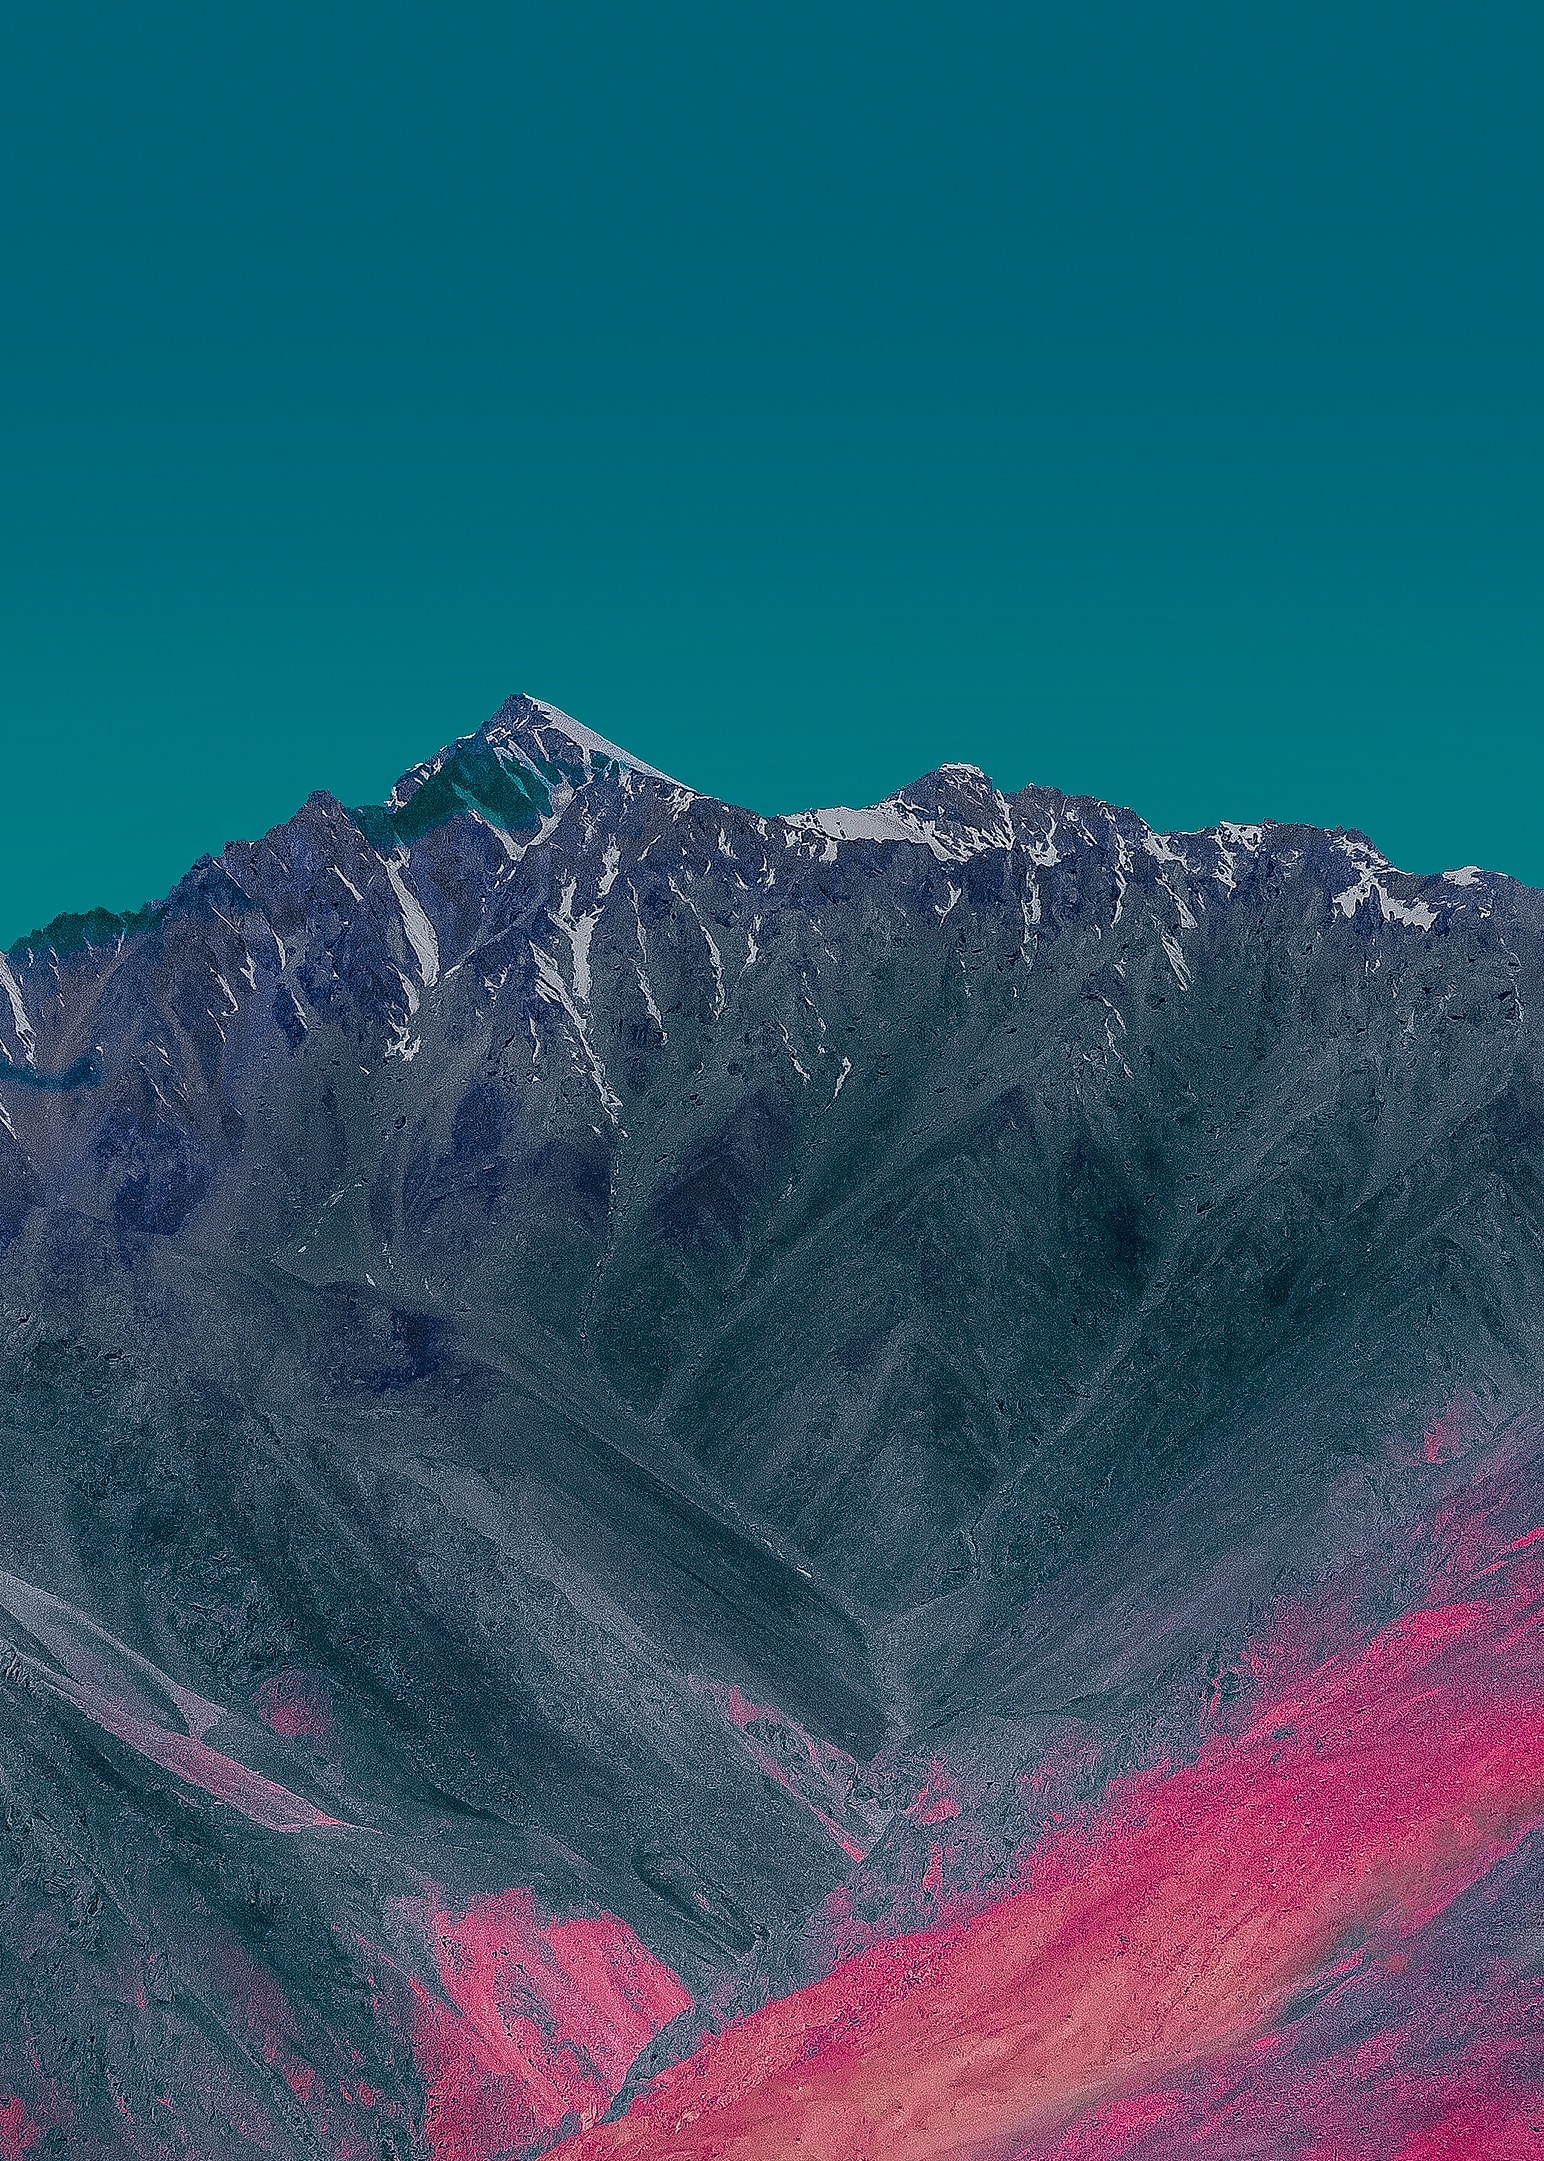 Chinese mountains with color game - bhibu